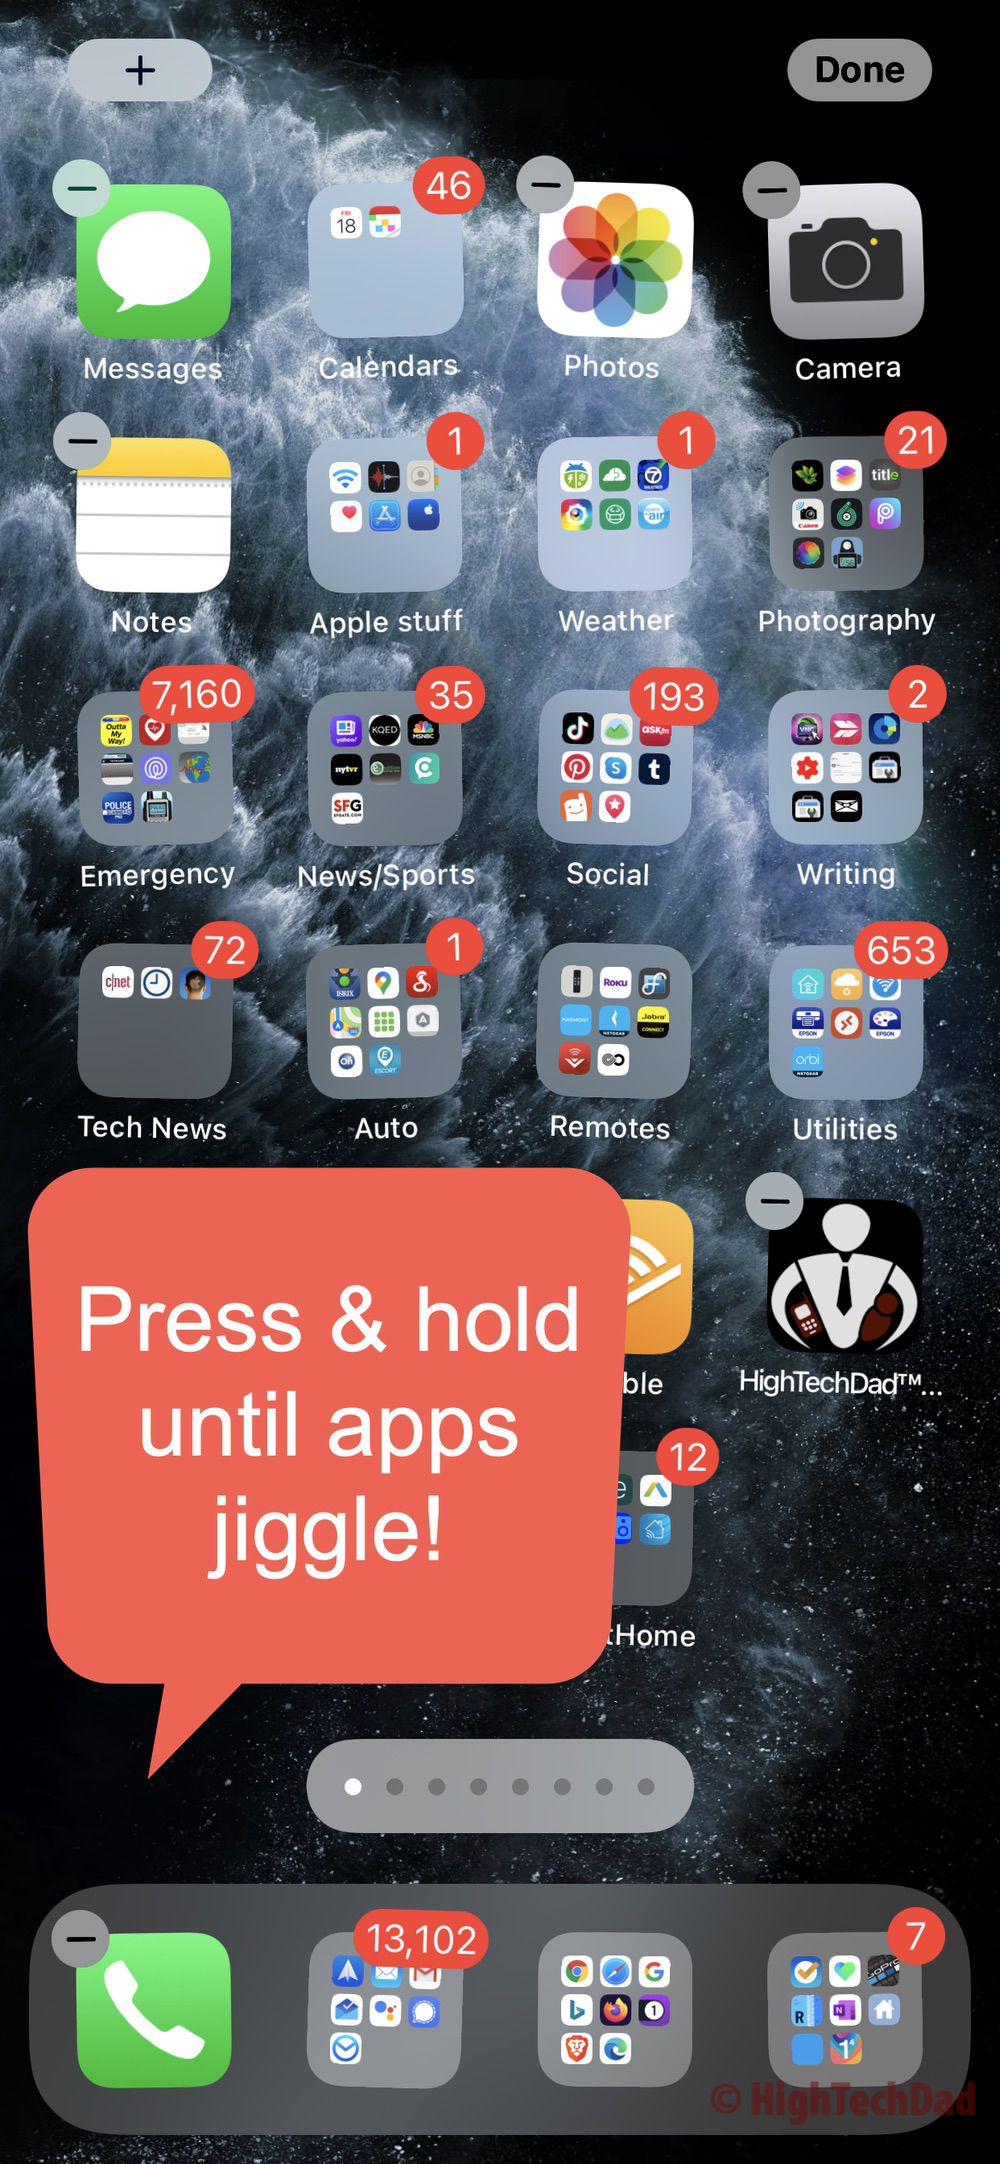 Press & hold until apps jiggle - HighTechDad iOS 14 quick tip